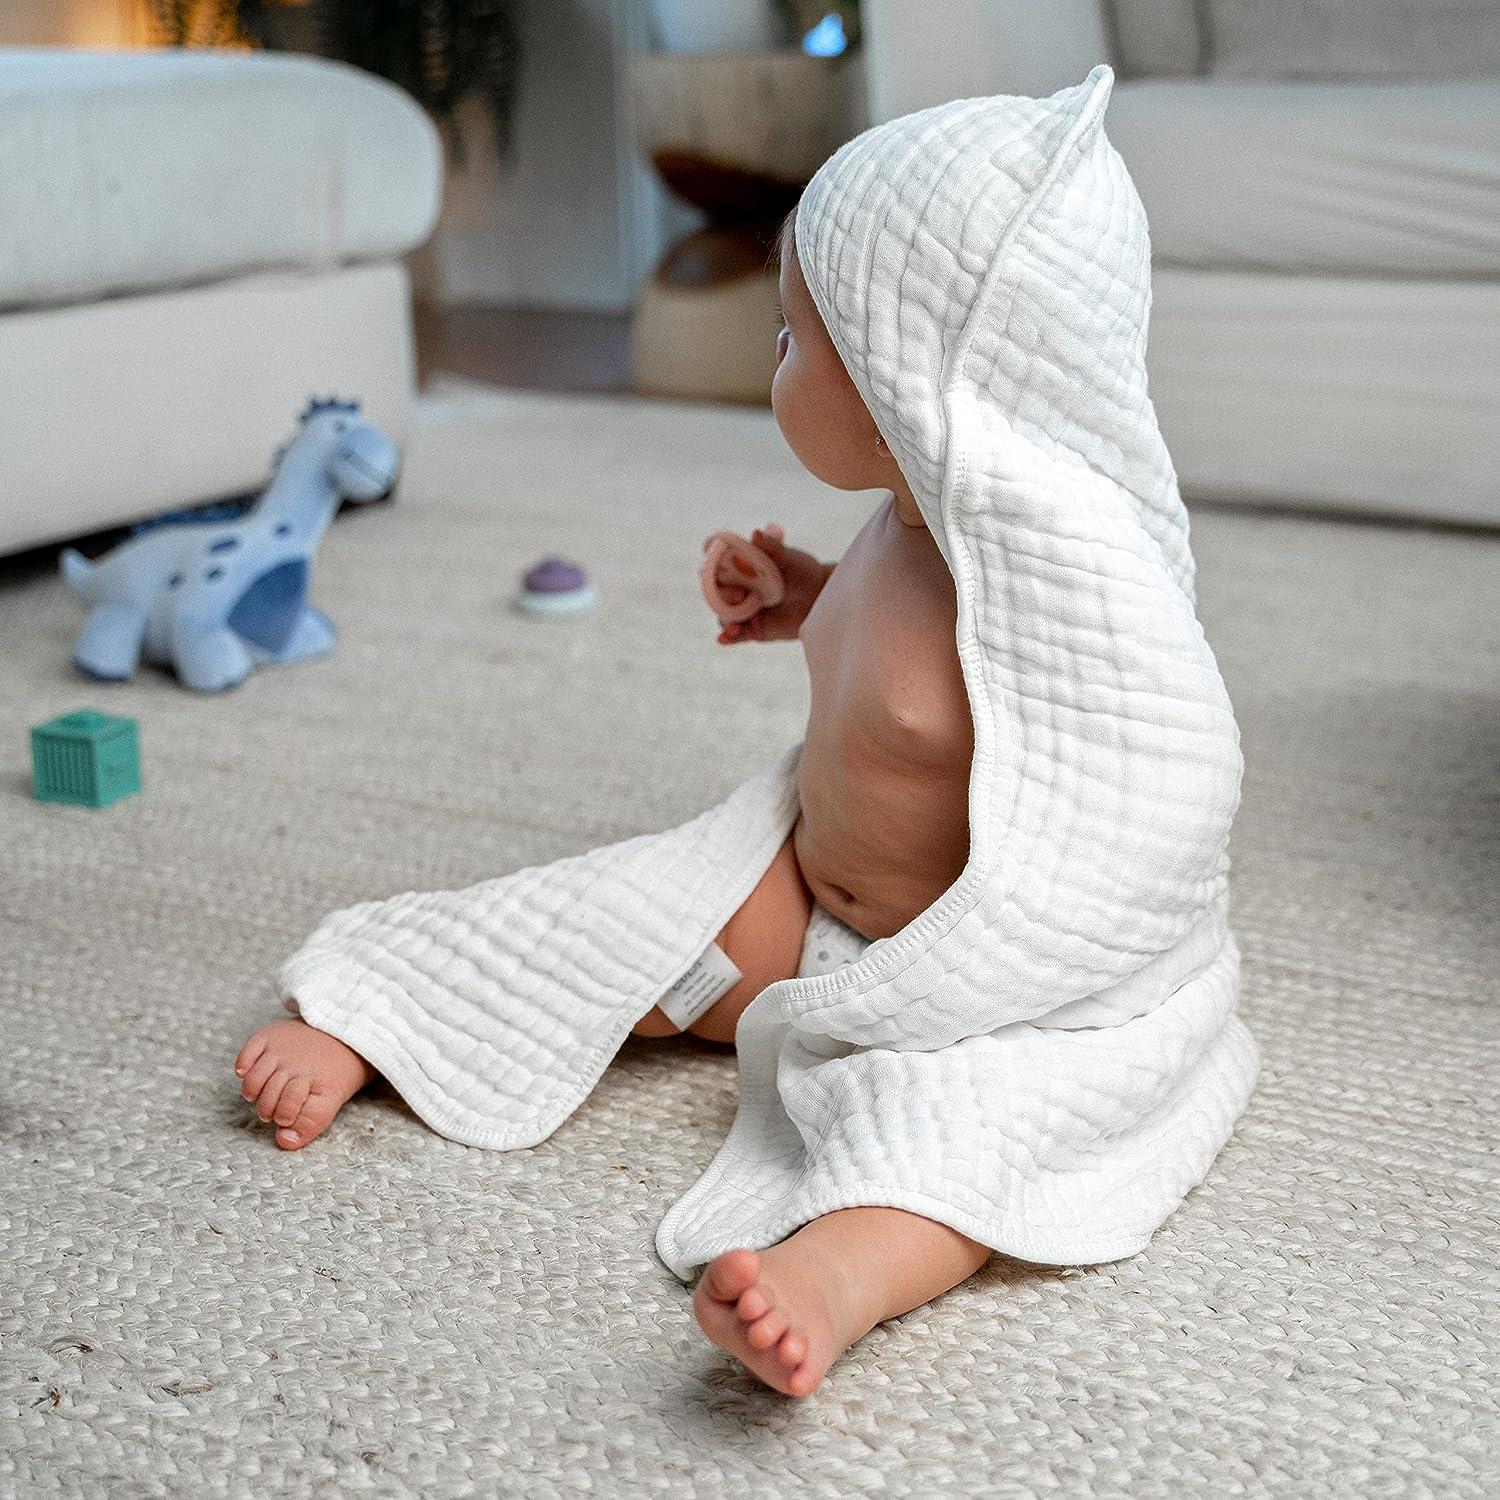 Baby Hooded Muslin Cotton Towel For Kids By Comfy Cubs : Target